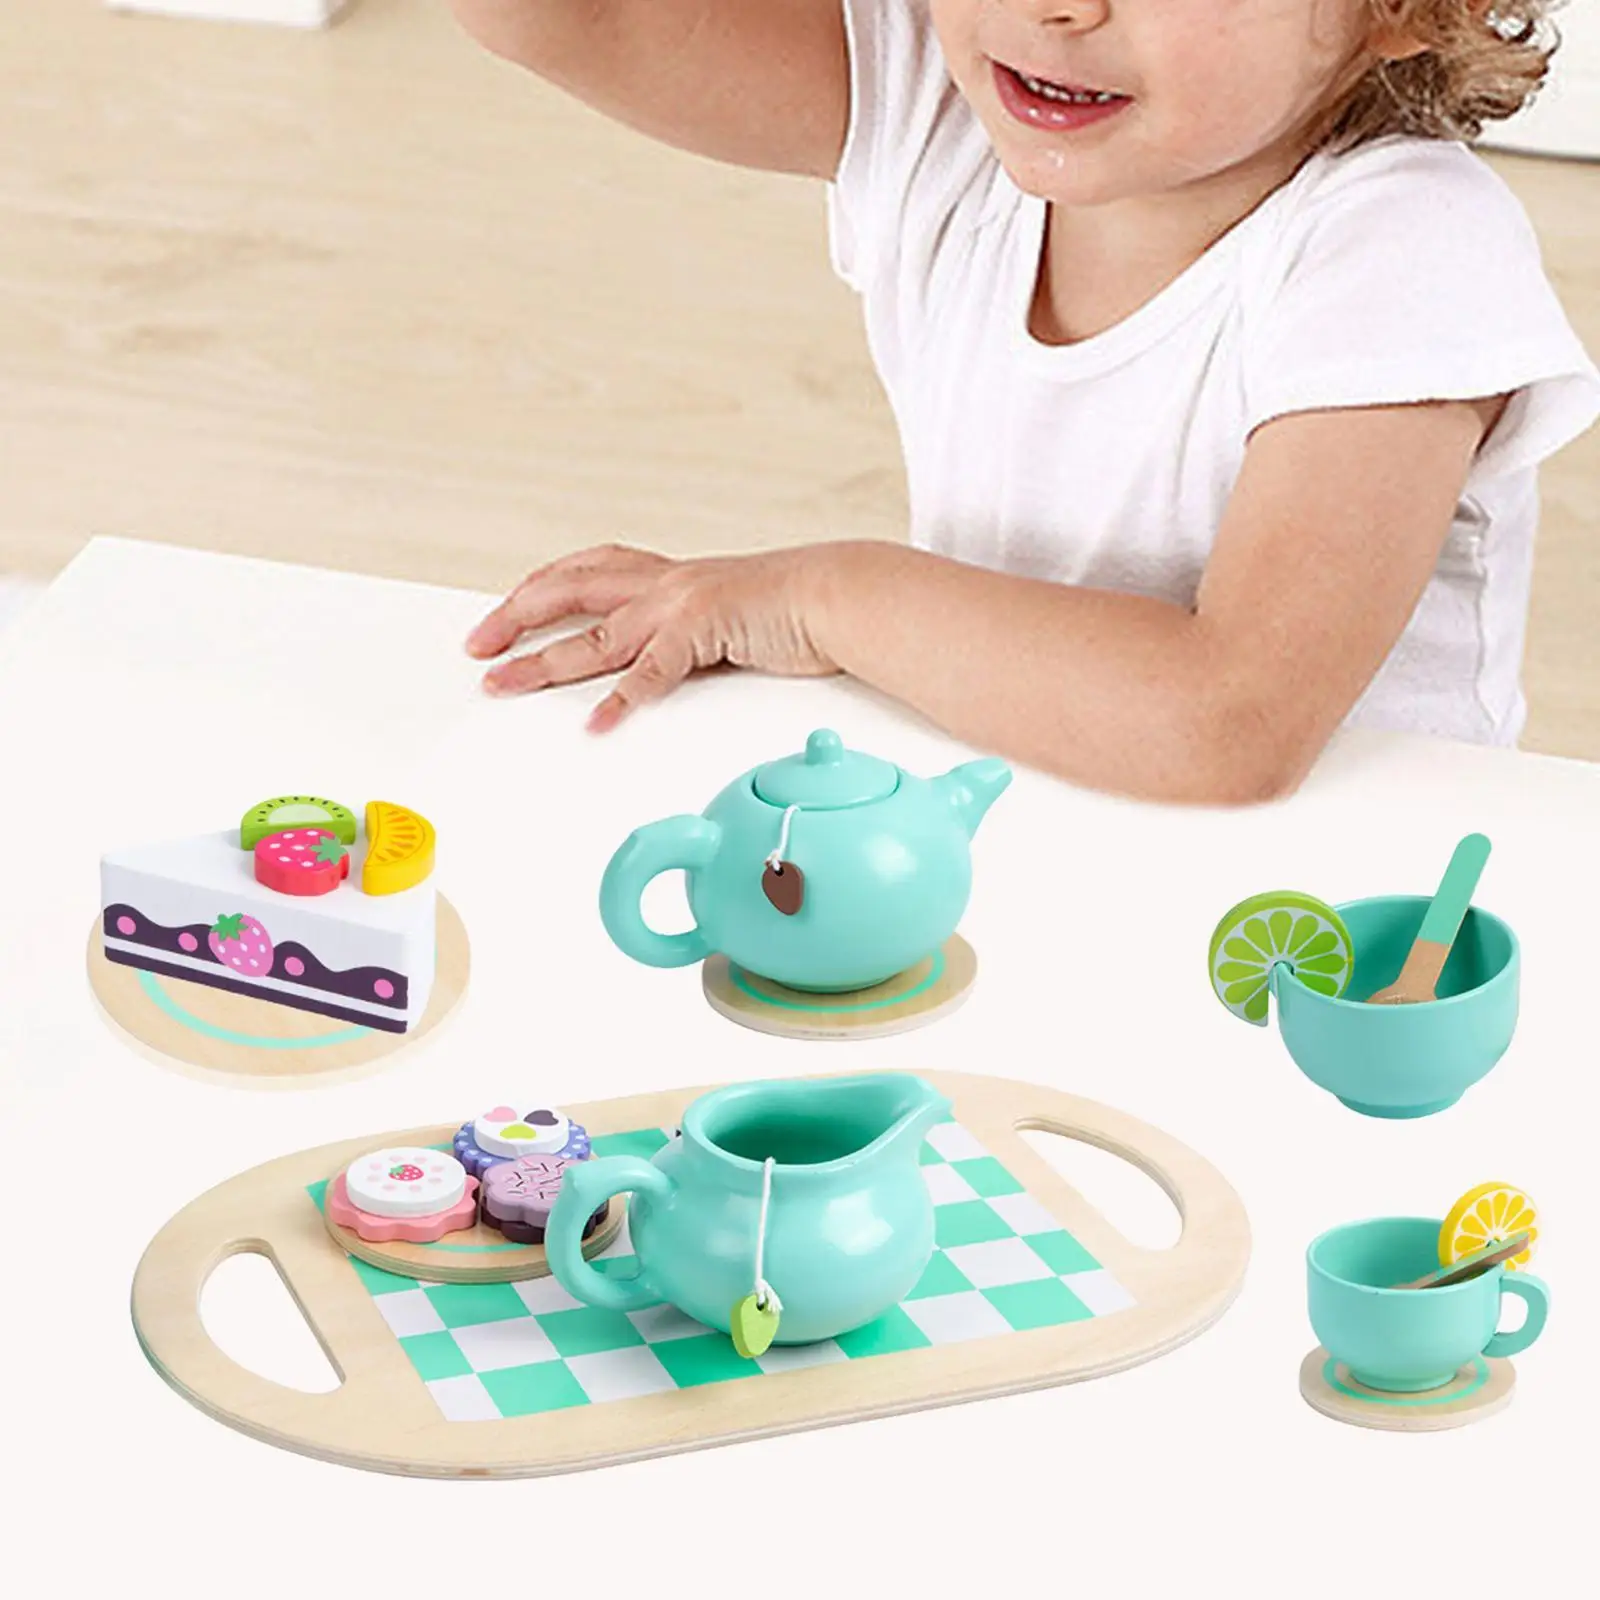 

Kids Tea Party with Teapot, Coaster, Coffee Mugs, Spoons, Saucers, and Serving Tray Montessori Toy for Kids Birthday Gift